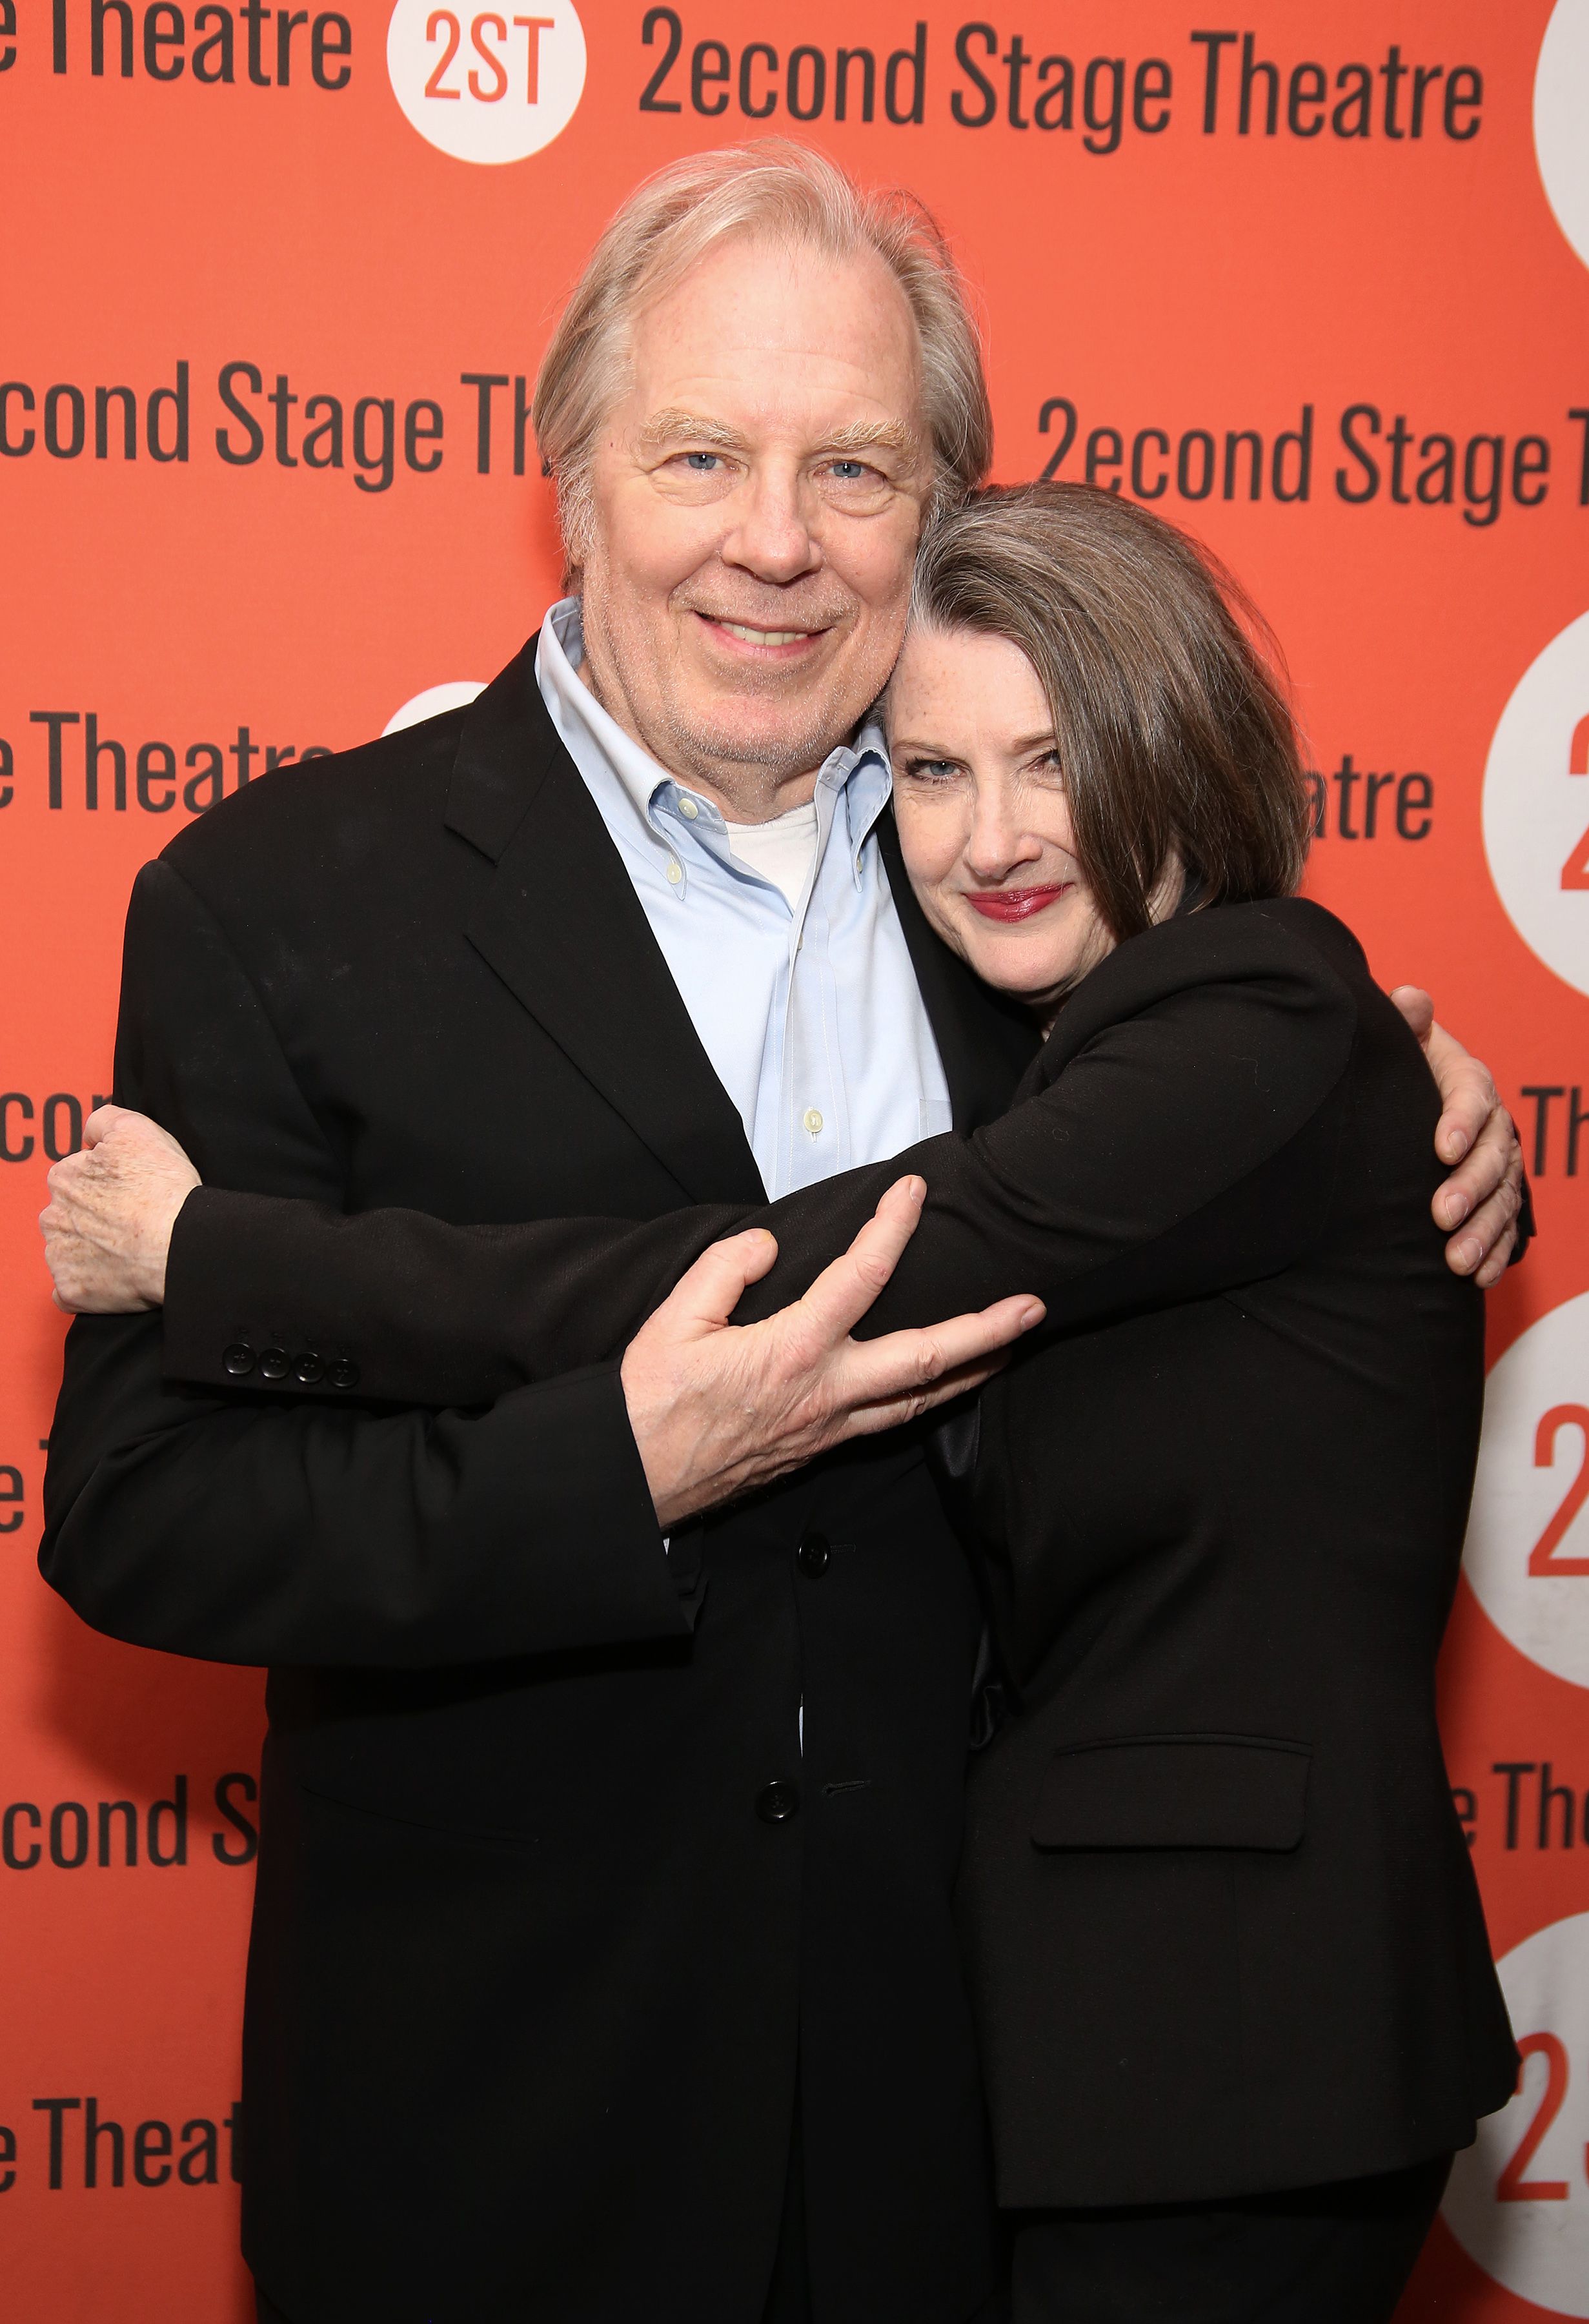 Michael McKean and Annette O'Toole at the Second Stage Theatre's Off-Broadway Opening Night After Party for "Man From Nebraska" on February 15, 2017, in New York City | Photo: Walter McBride/WireImage/Getty Images